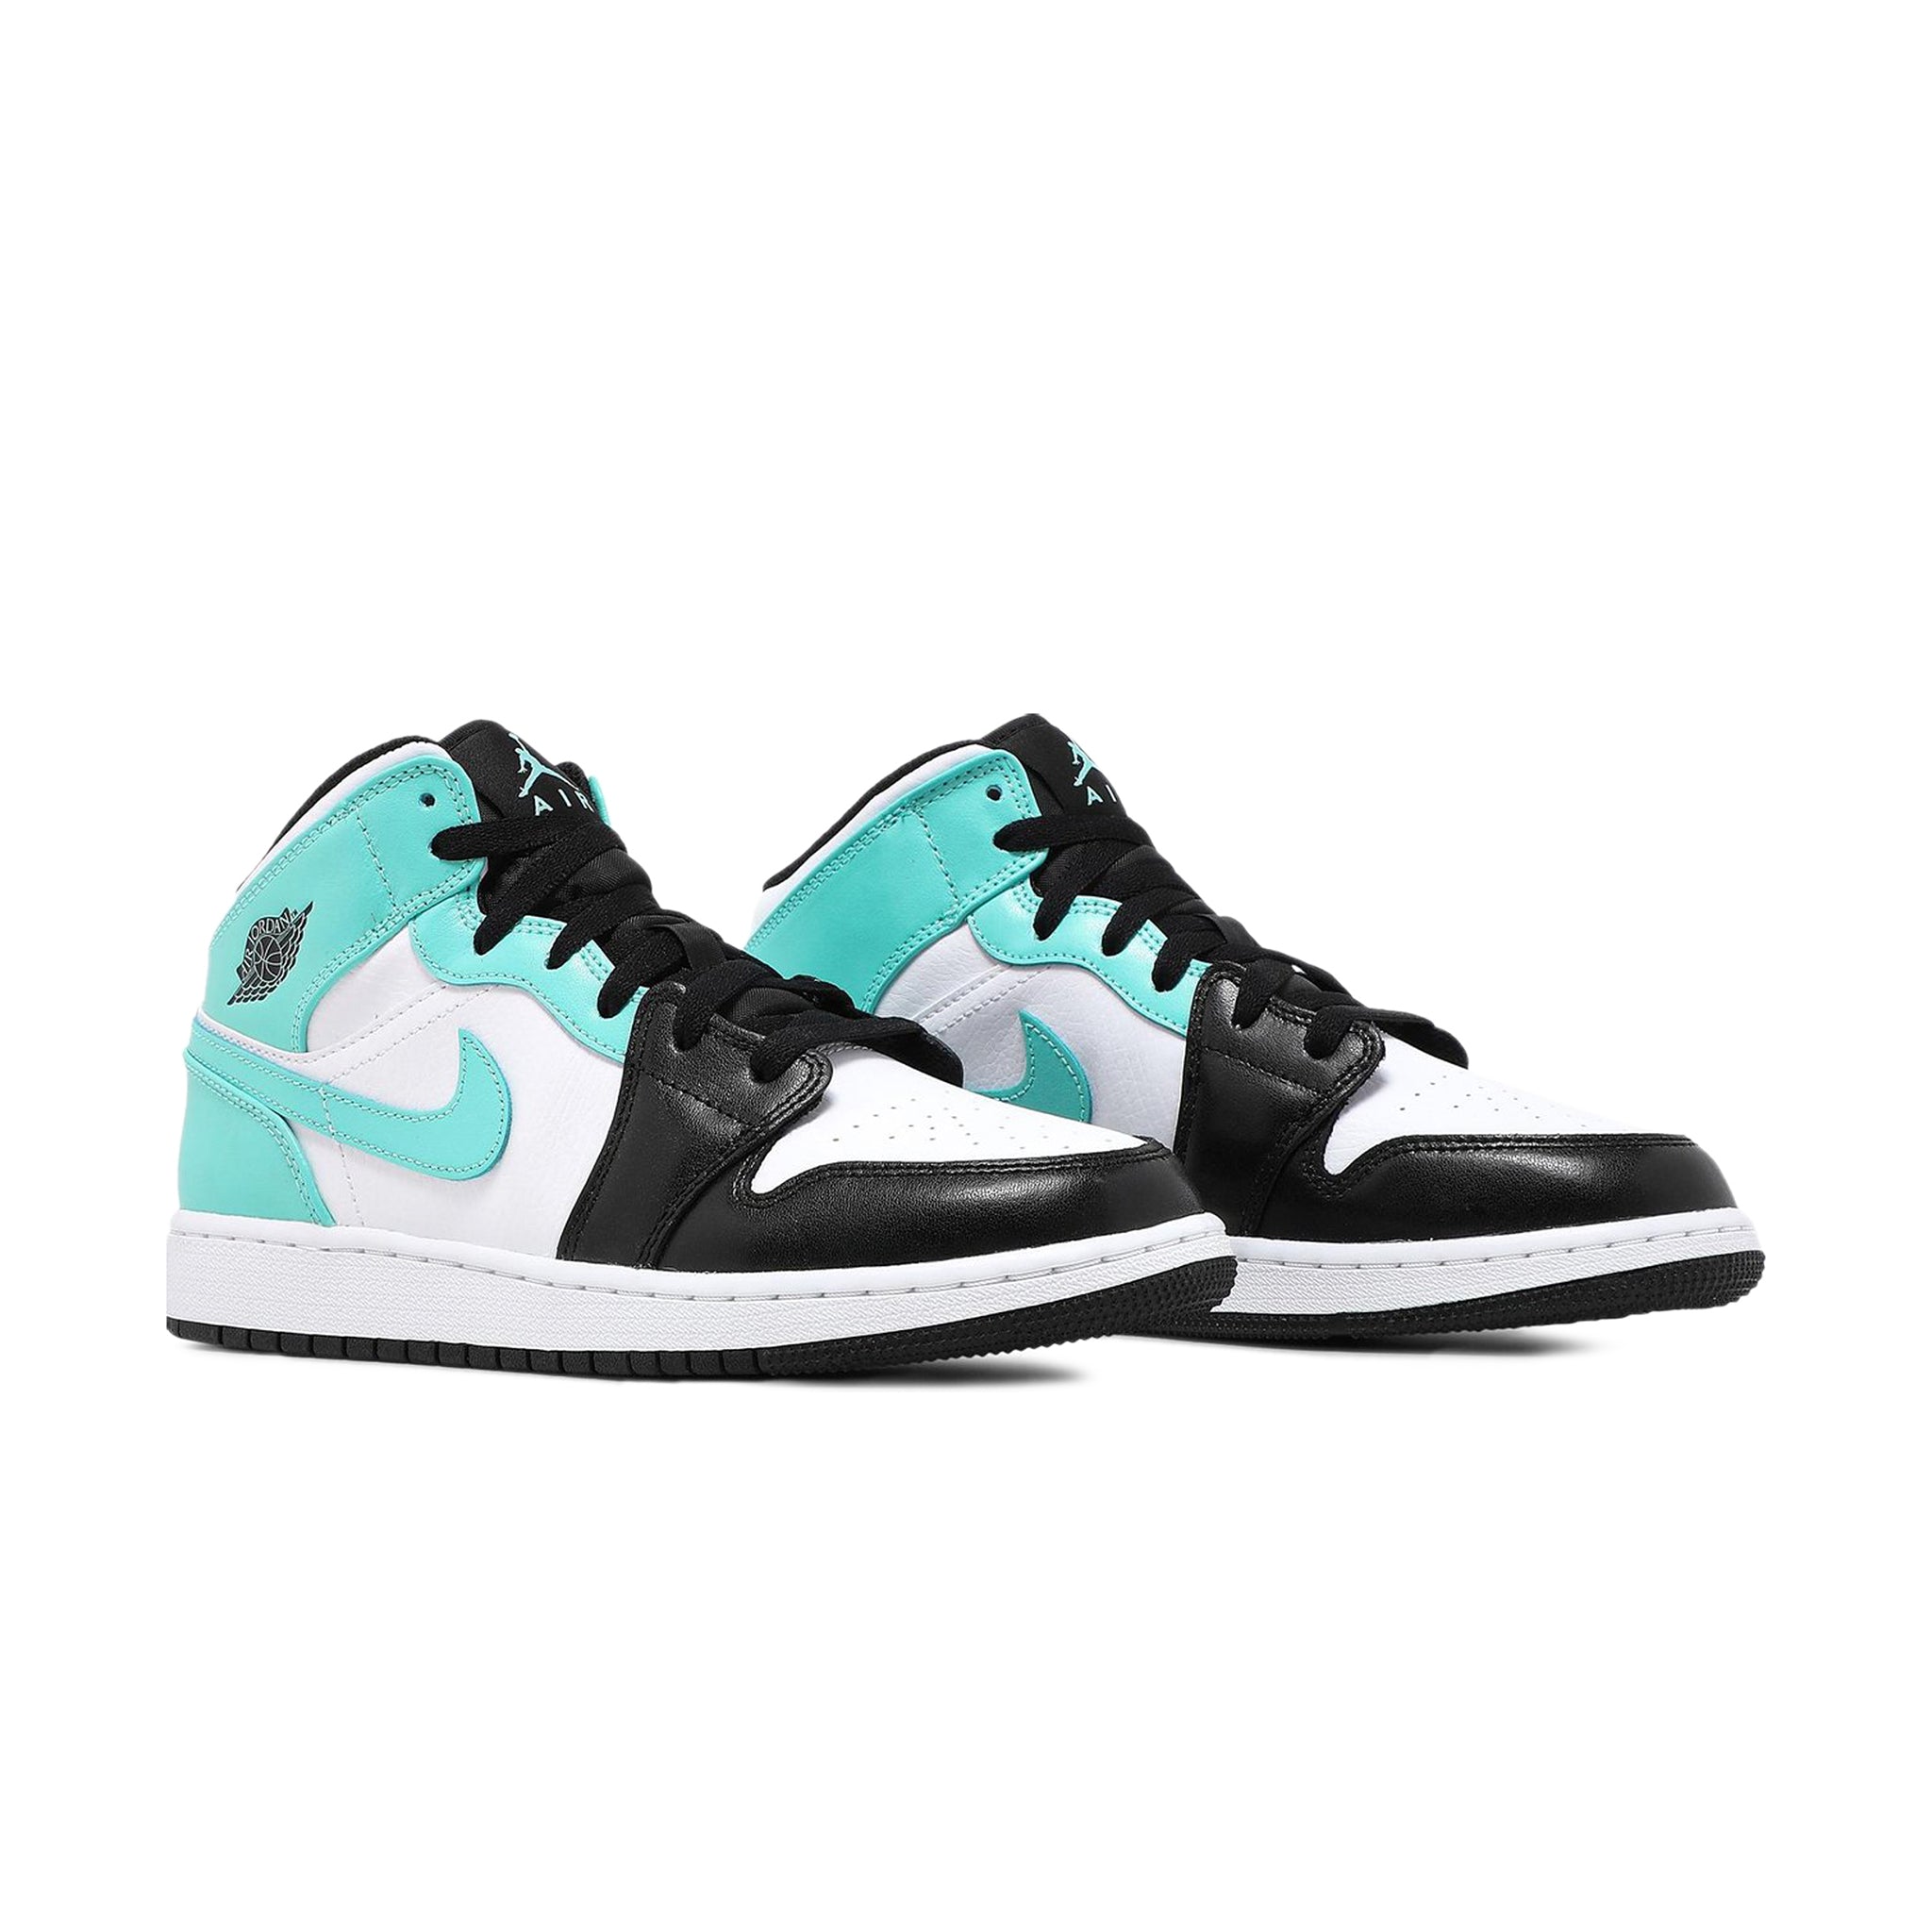 Front side view of Air Jordan 1 Mid Tropical Twist Igloo (GS) 554725-132